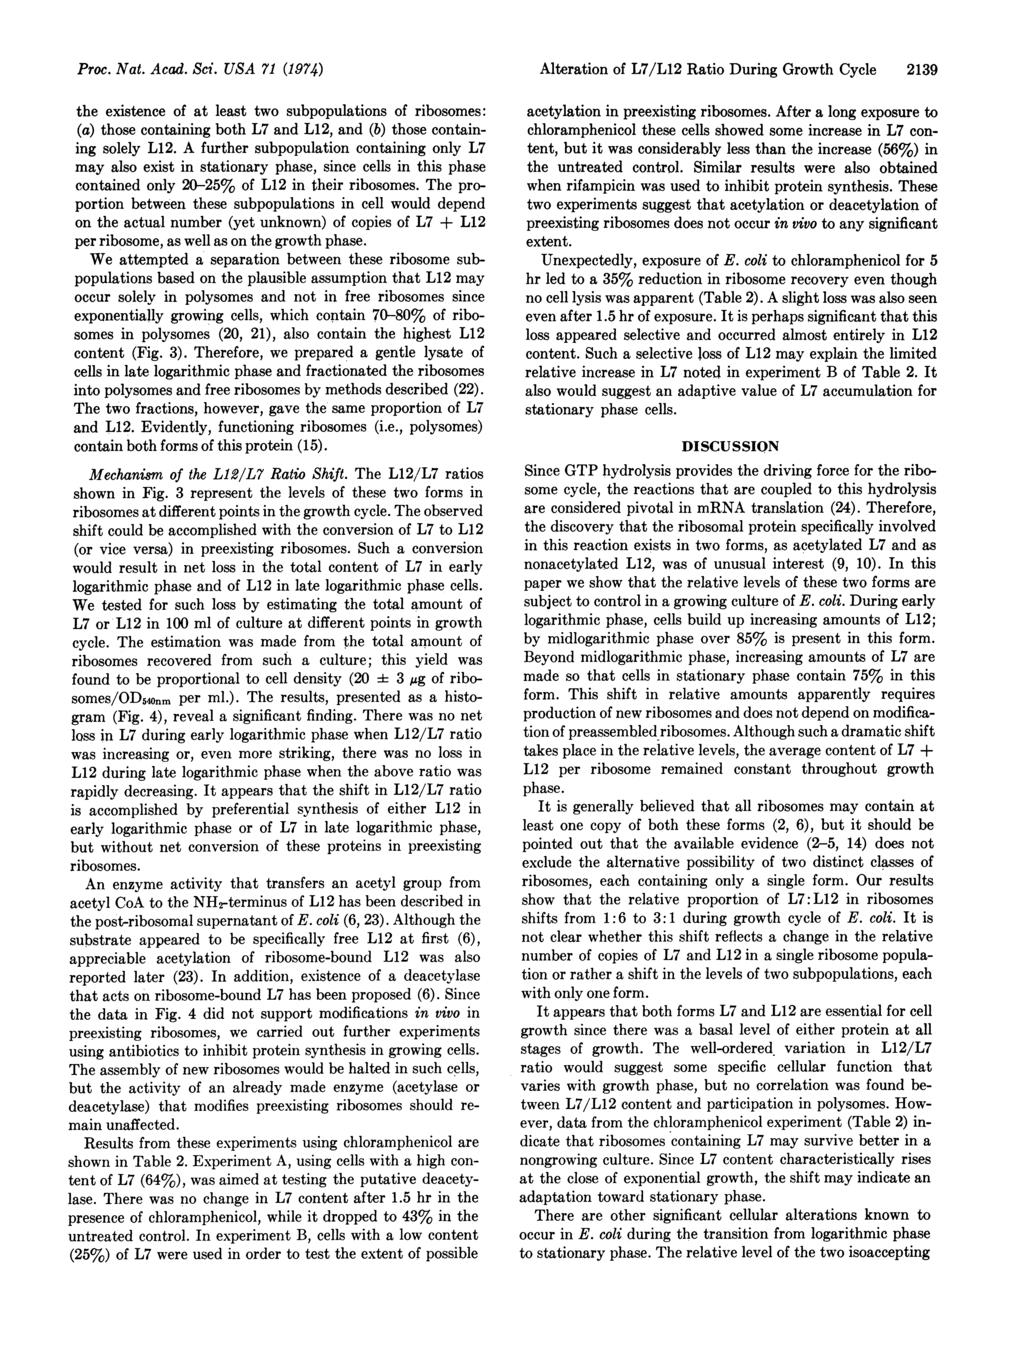 Proc. Nat. Acad. Sci. USA 71 (1974) the existence of at least two subpopulations of ribosomes: (a) those containing both L7 and L12, and (b) those containing solely L12.